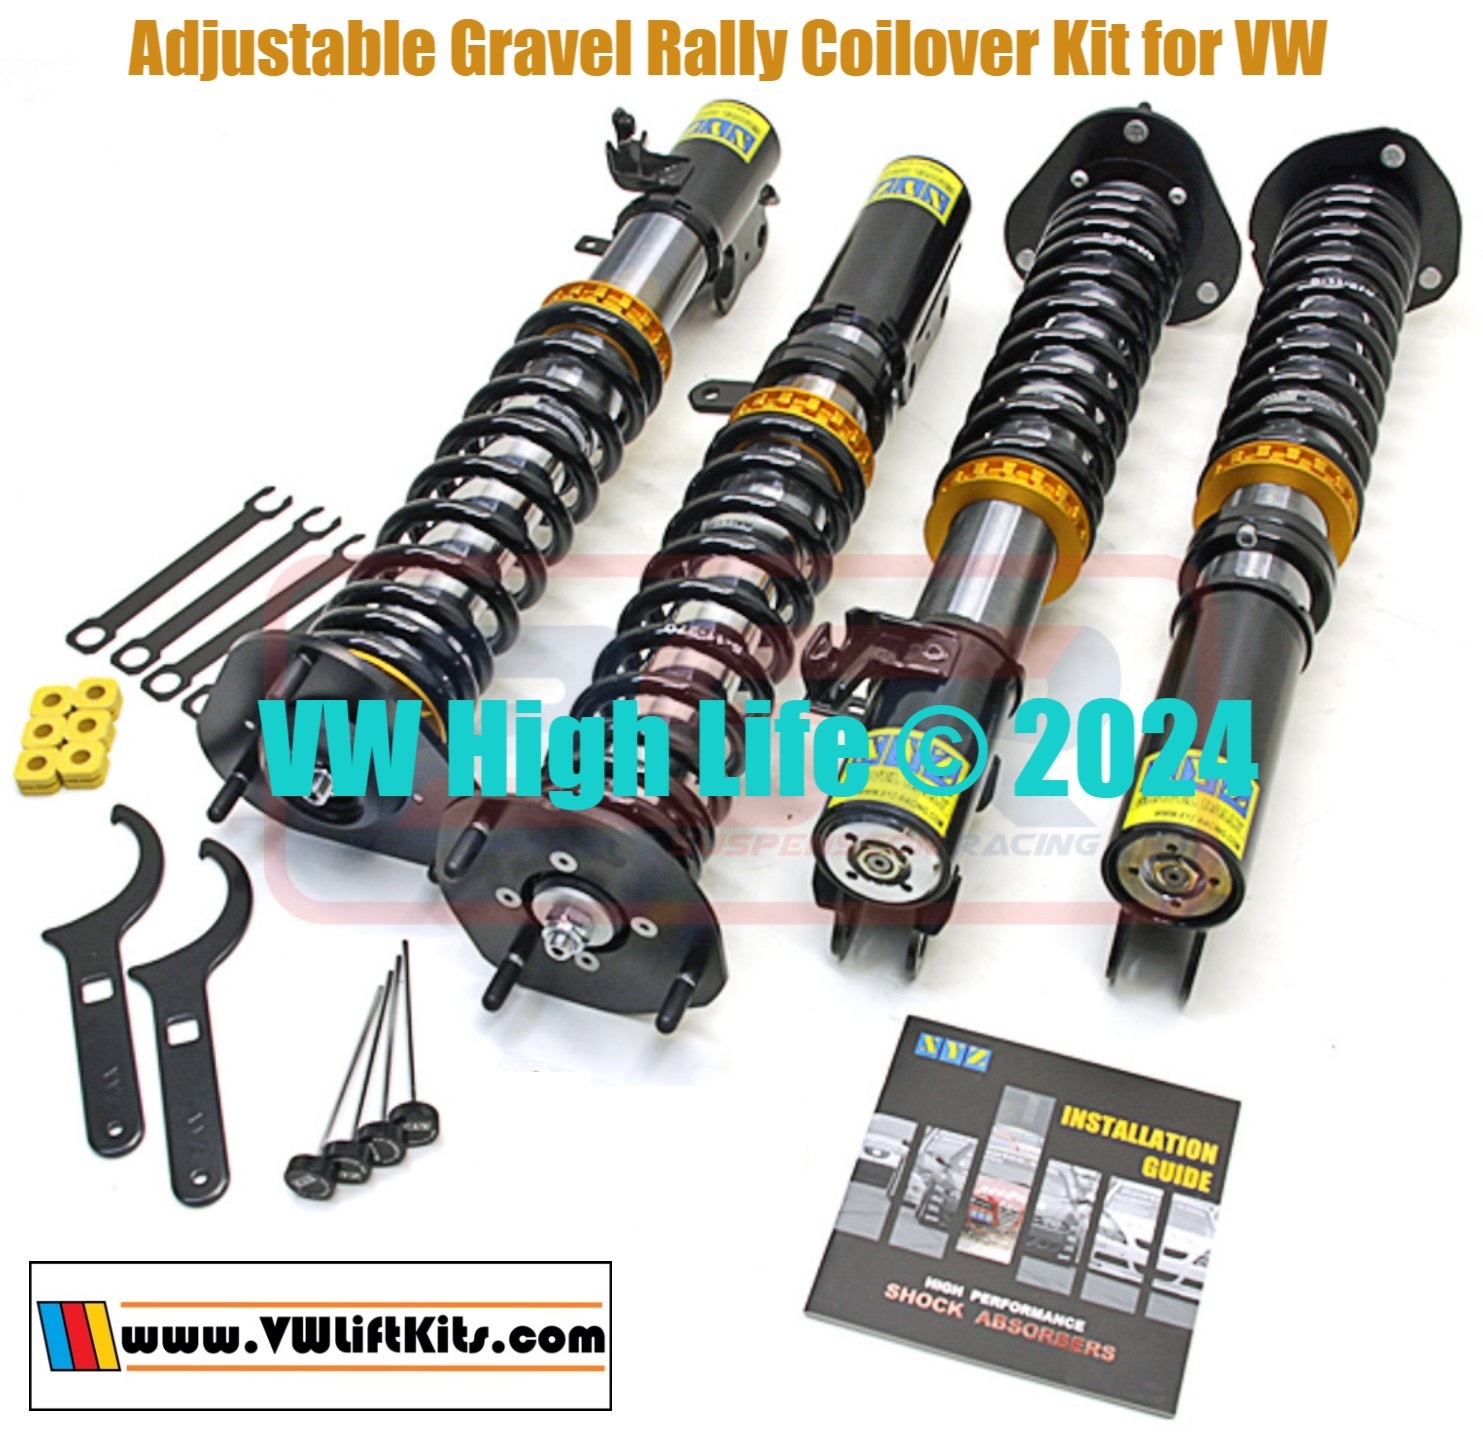 Coilover Suspension with 55mm piston with adjustable 30-way dampening settings. Available for VW Golf MK1, 2, and 3. Jetta MK2 and MK3. Vento 1991-98.